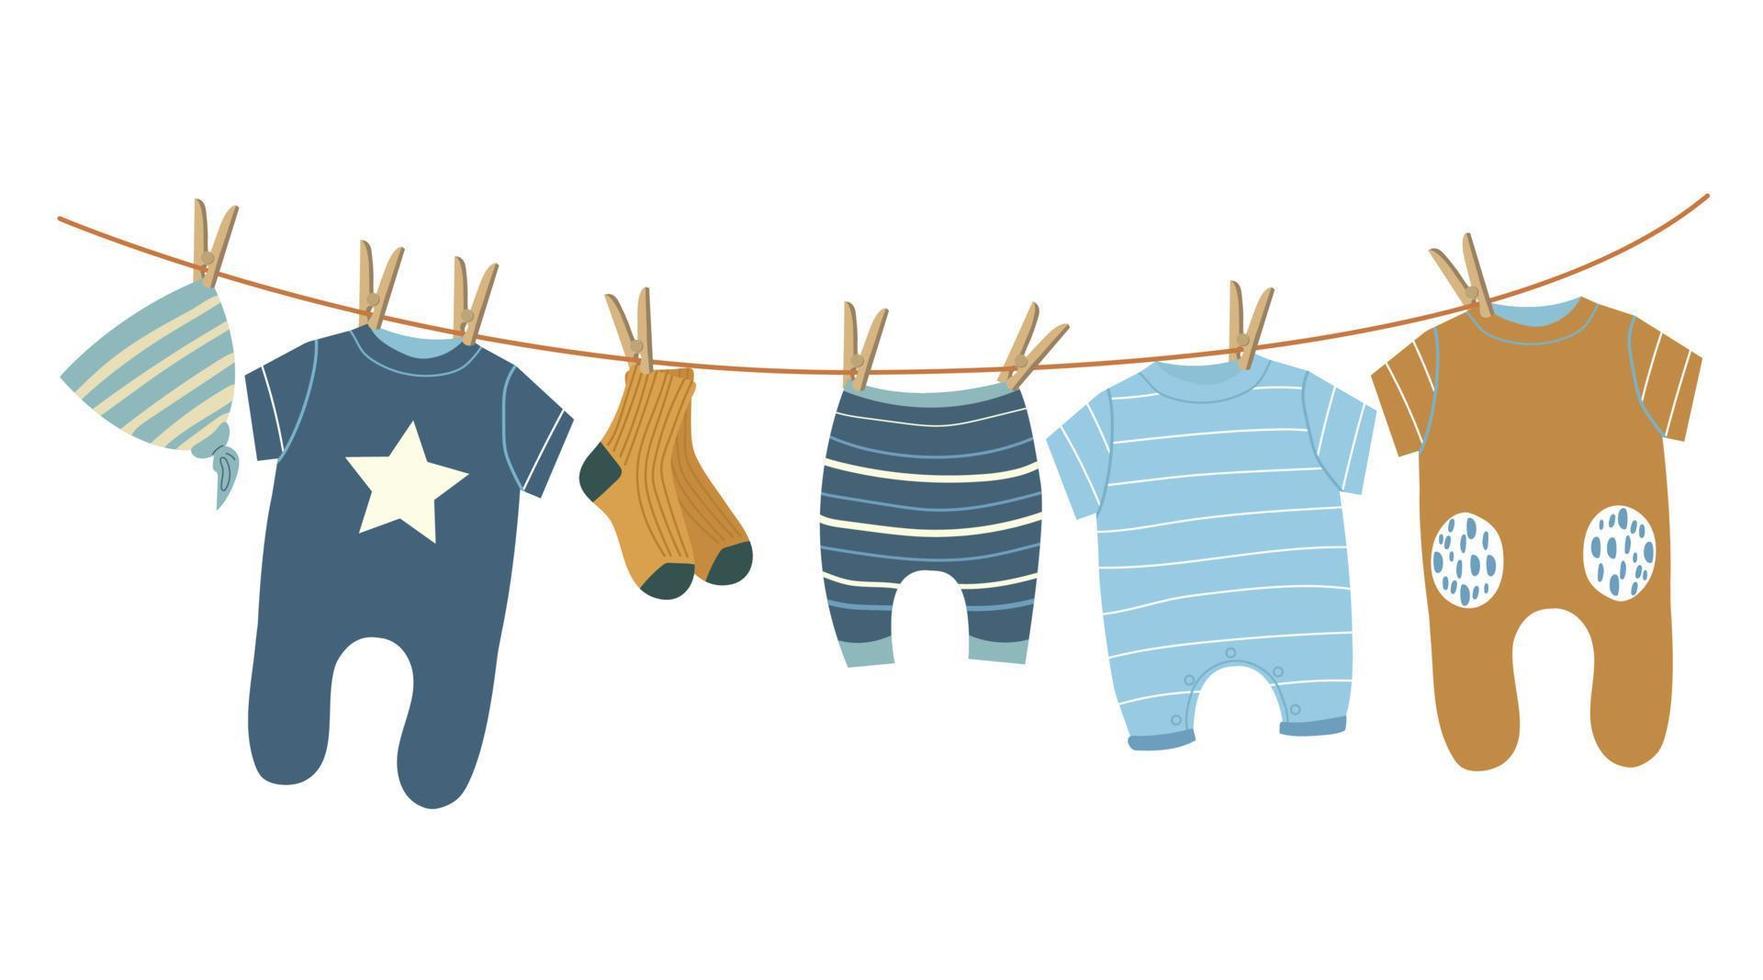 Children's clothes dry on a rope. Clothing for babies. Body, overalls, for boys. Set of clothes icons in flat style isolated on white background. isolated objects. vector